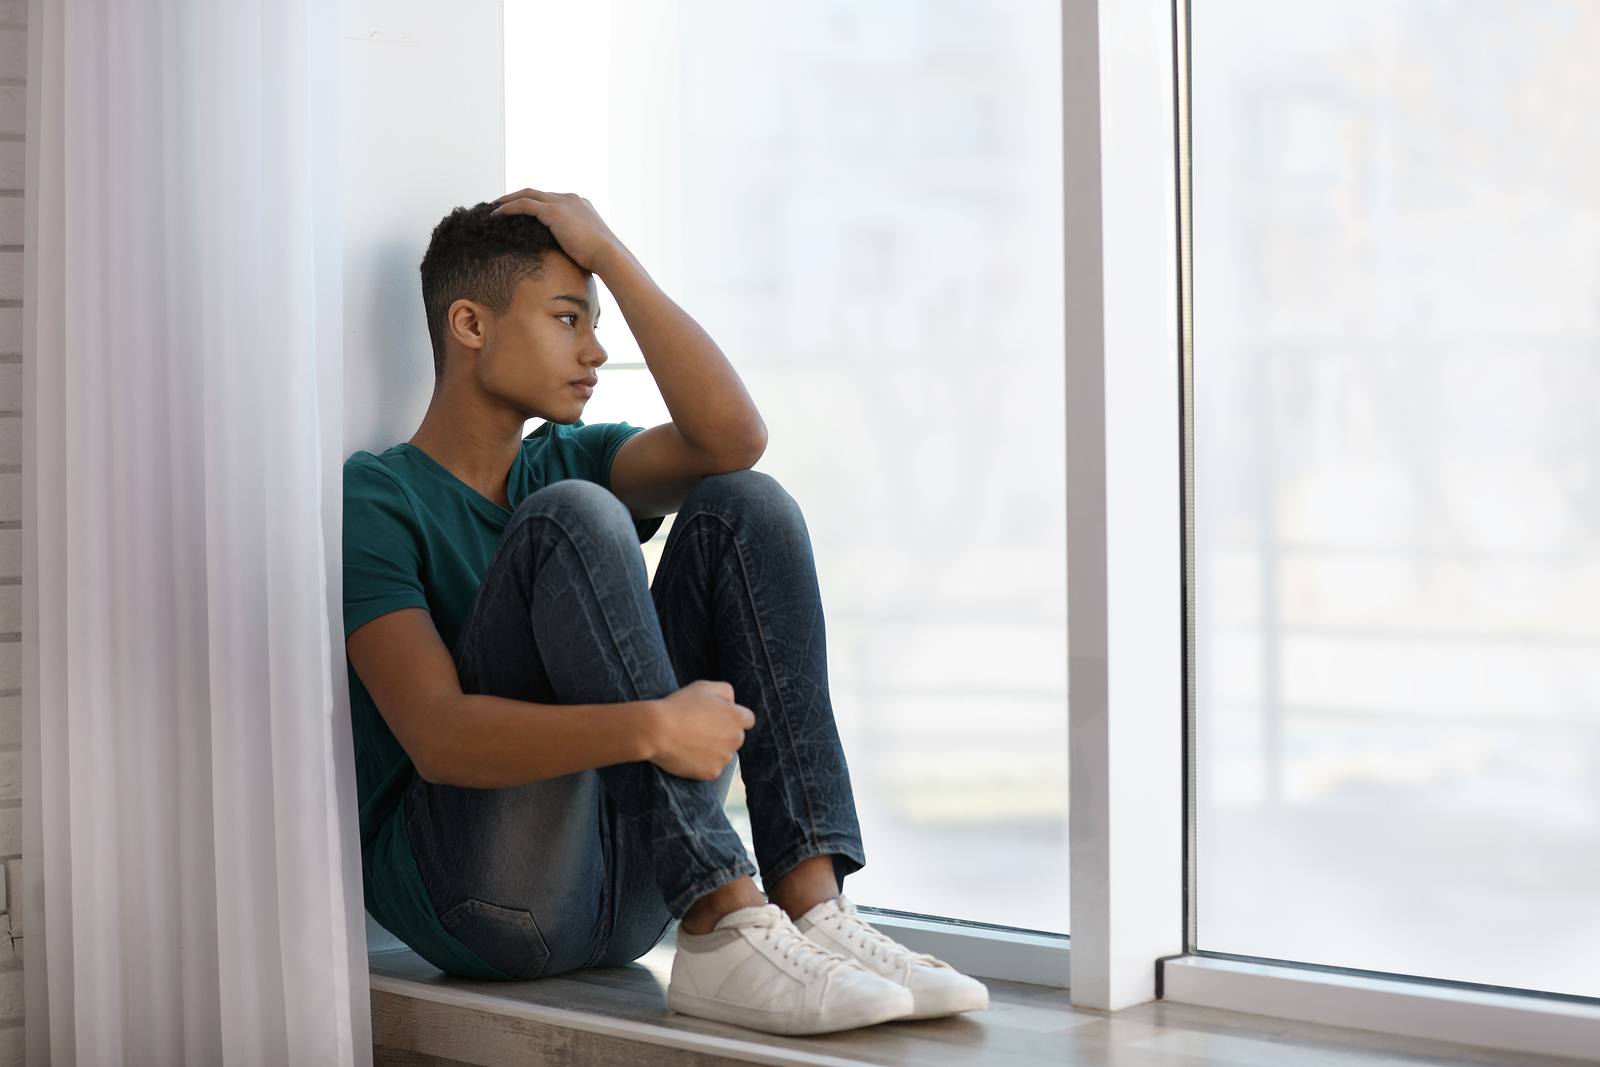 depressed male student could be in a toxic relationship